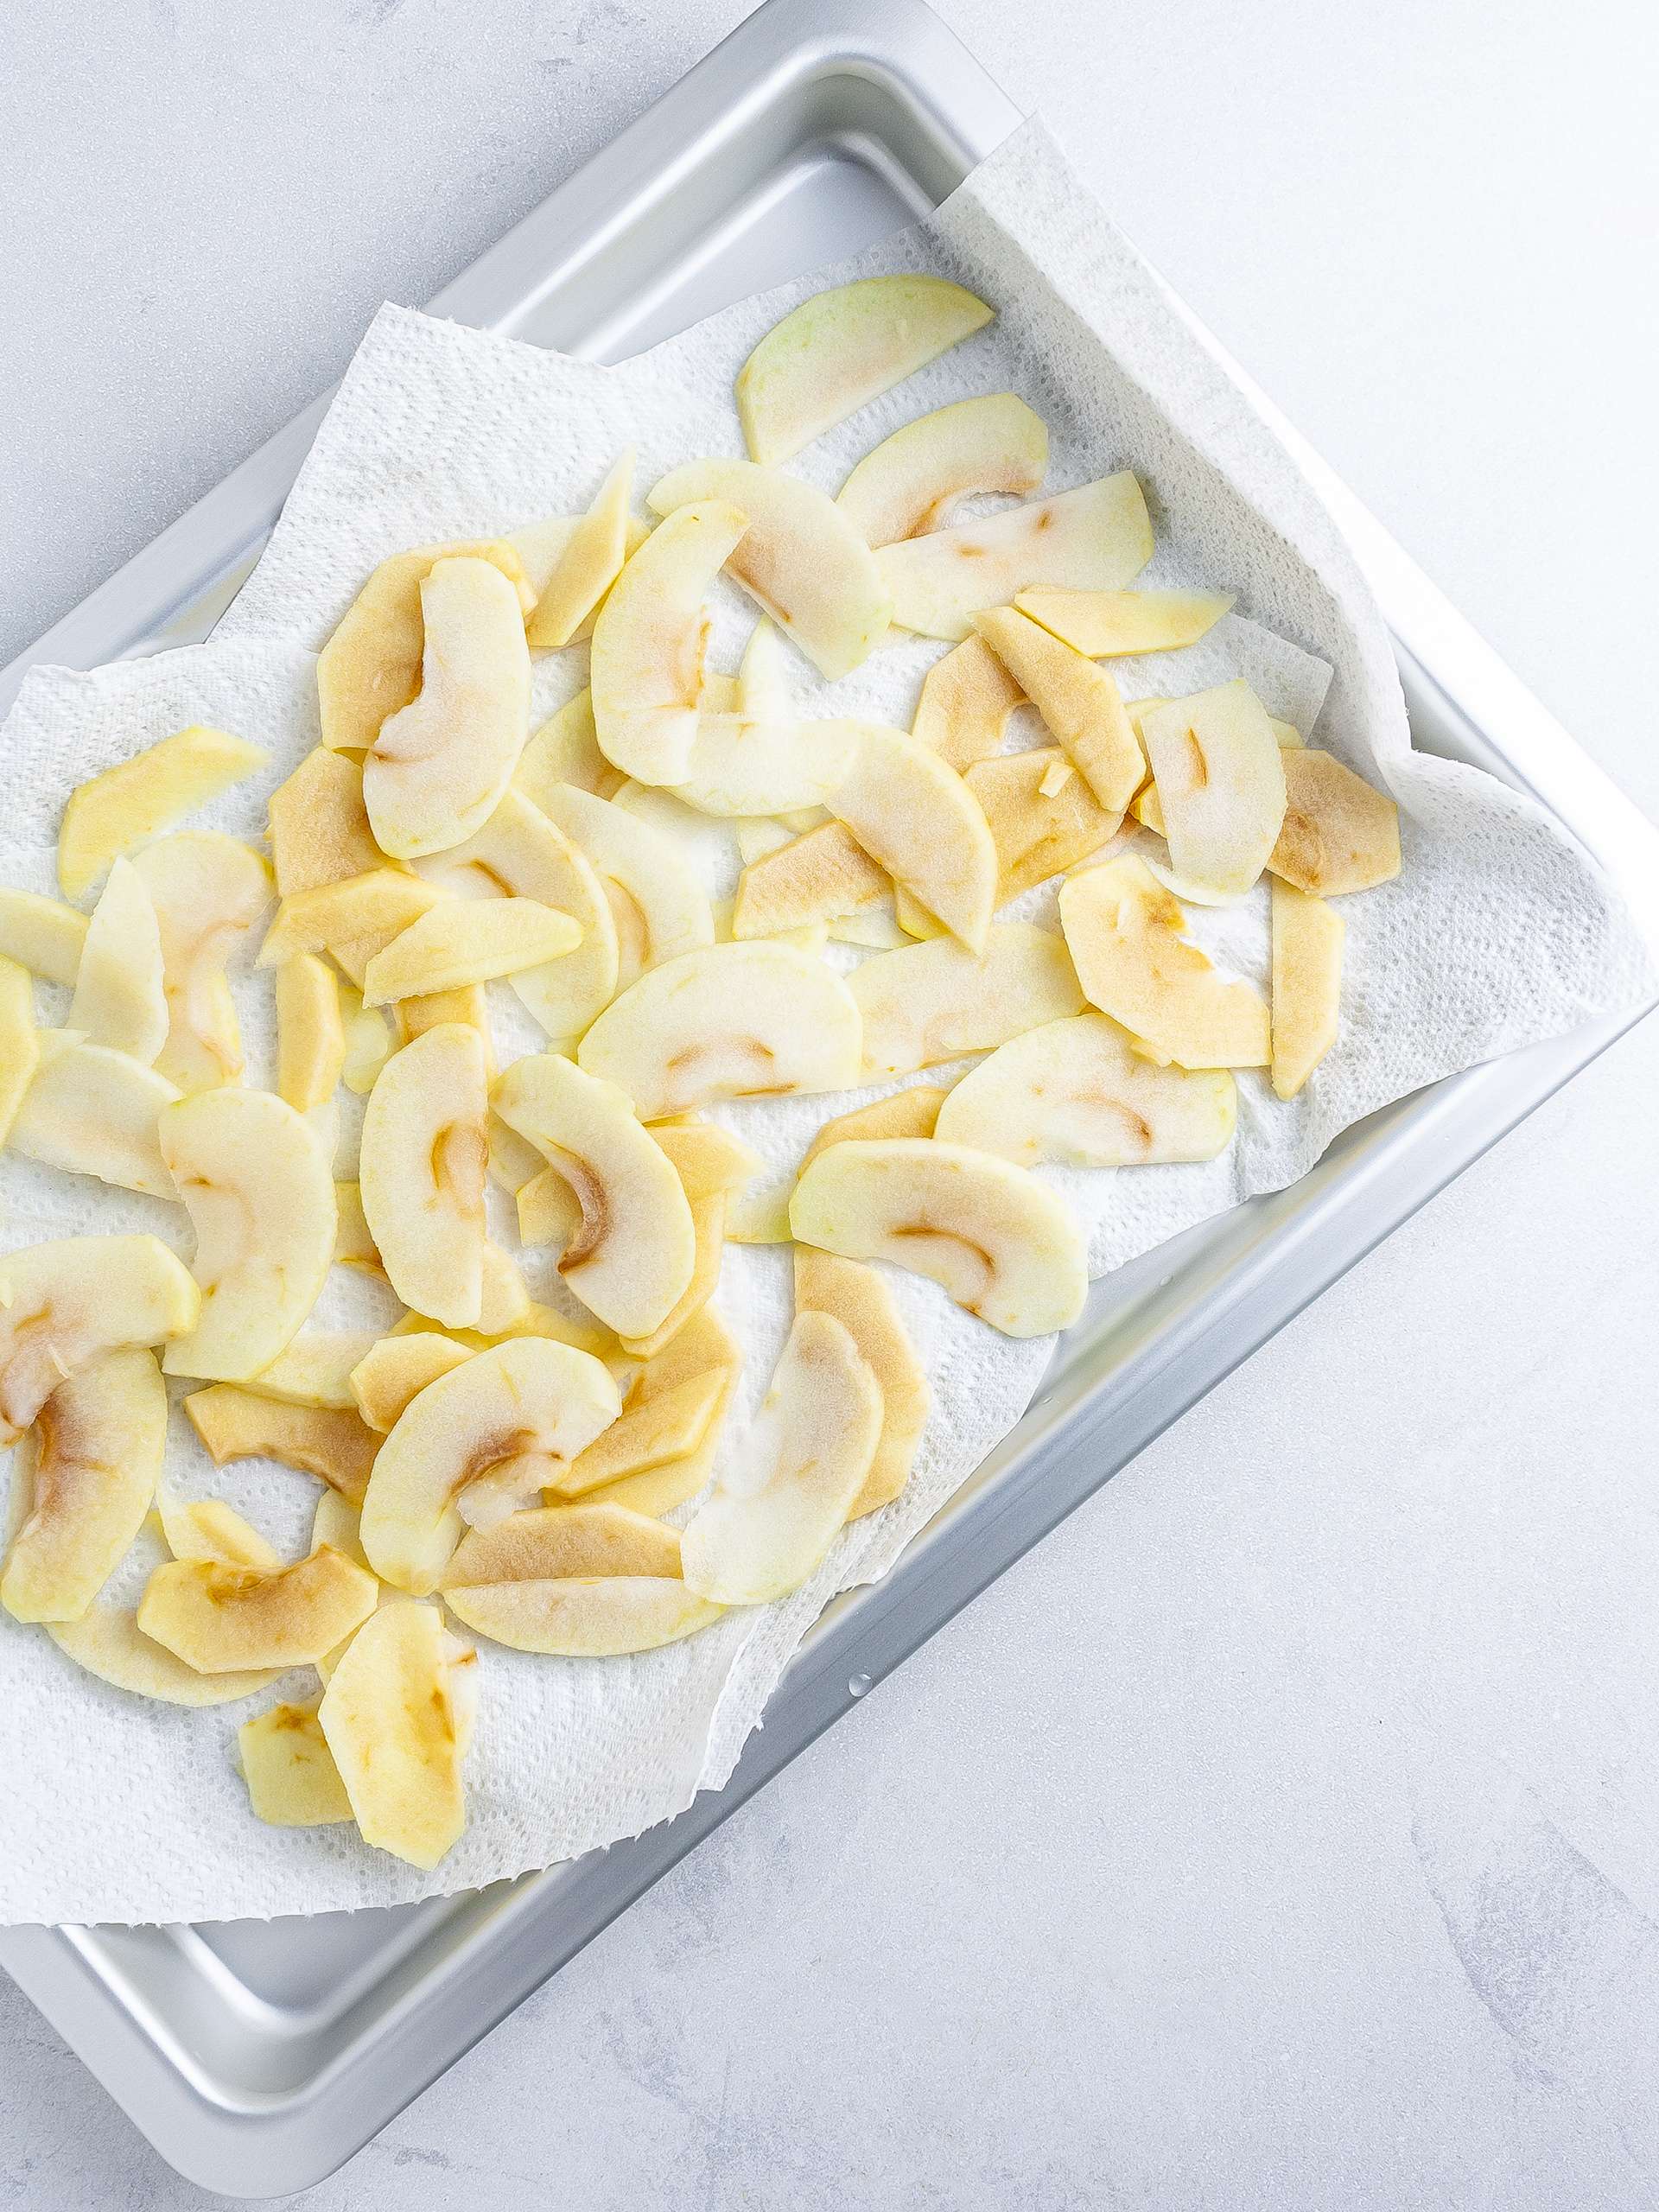 Cooked apple wedges on a tray